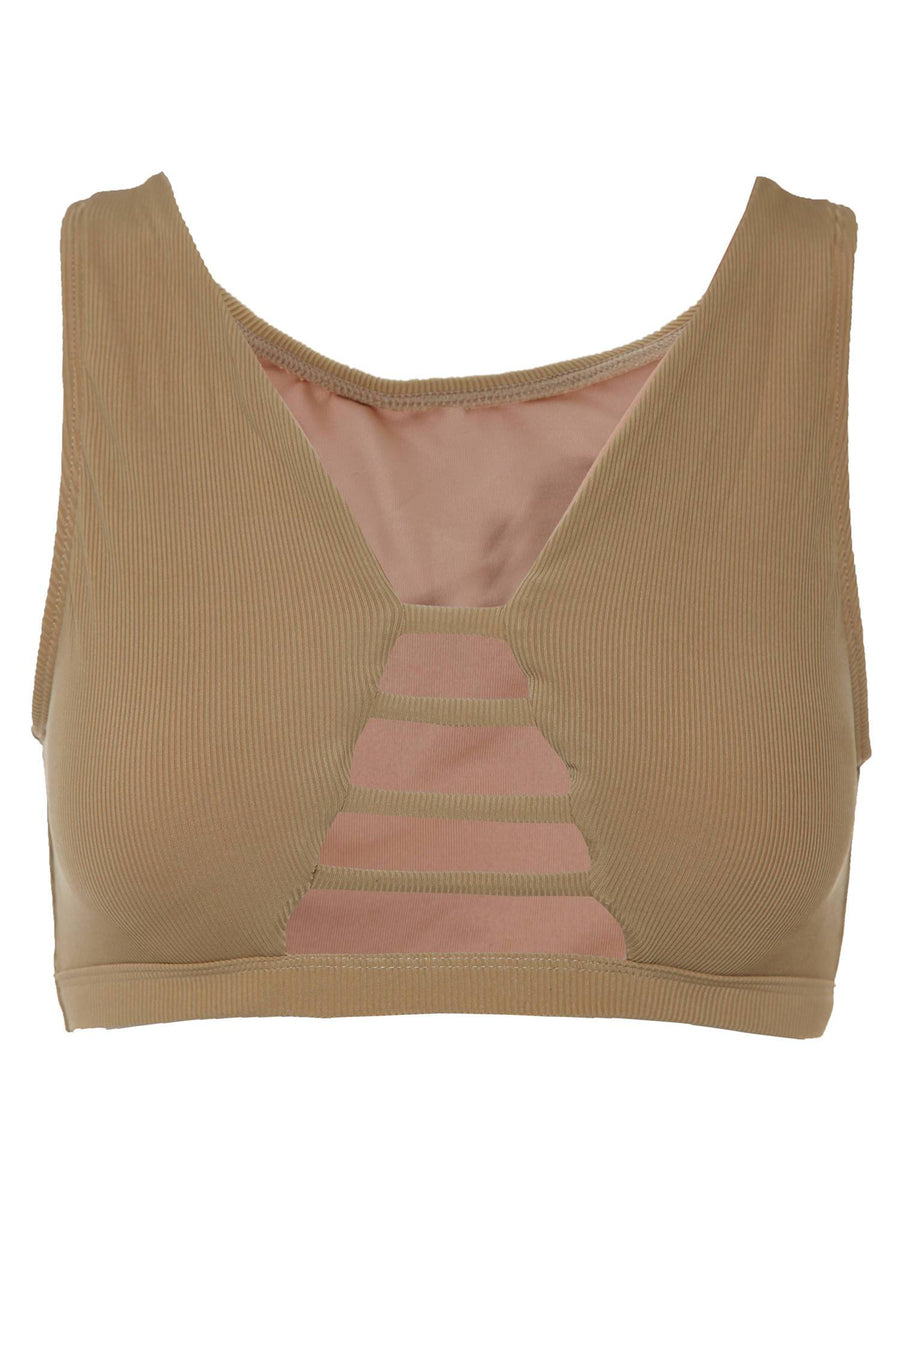 The Valley Top - Ribbed Sand Top